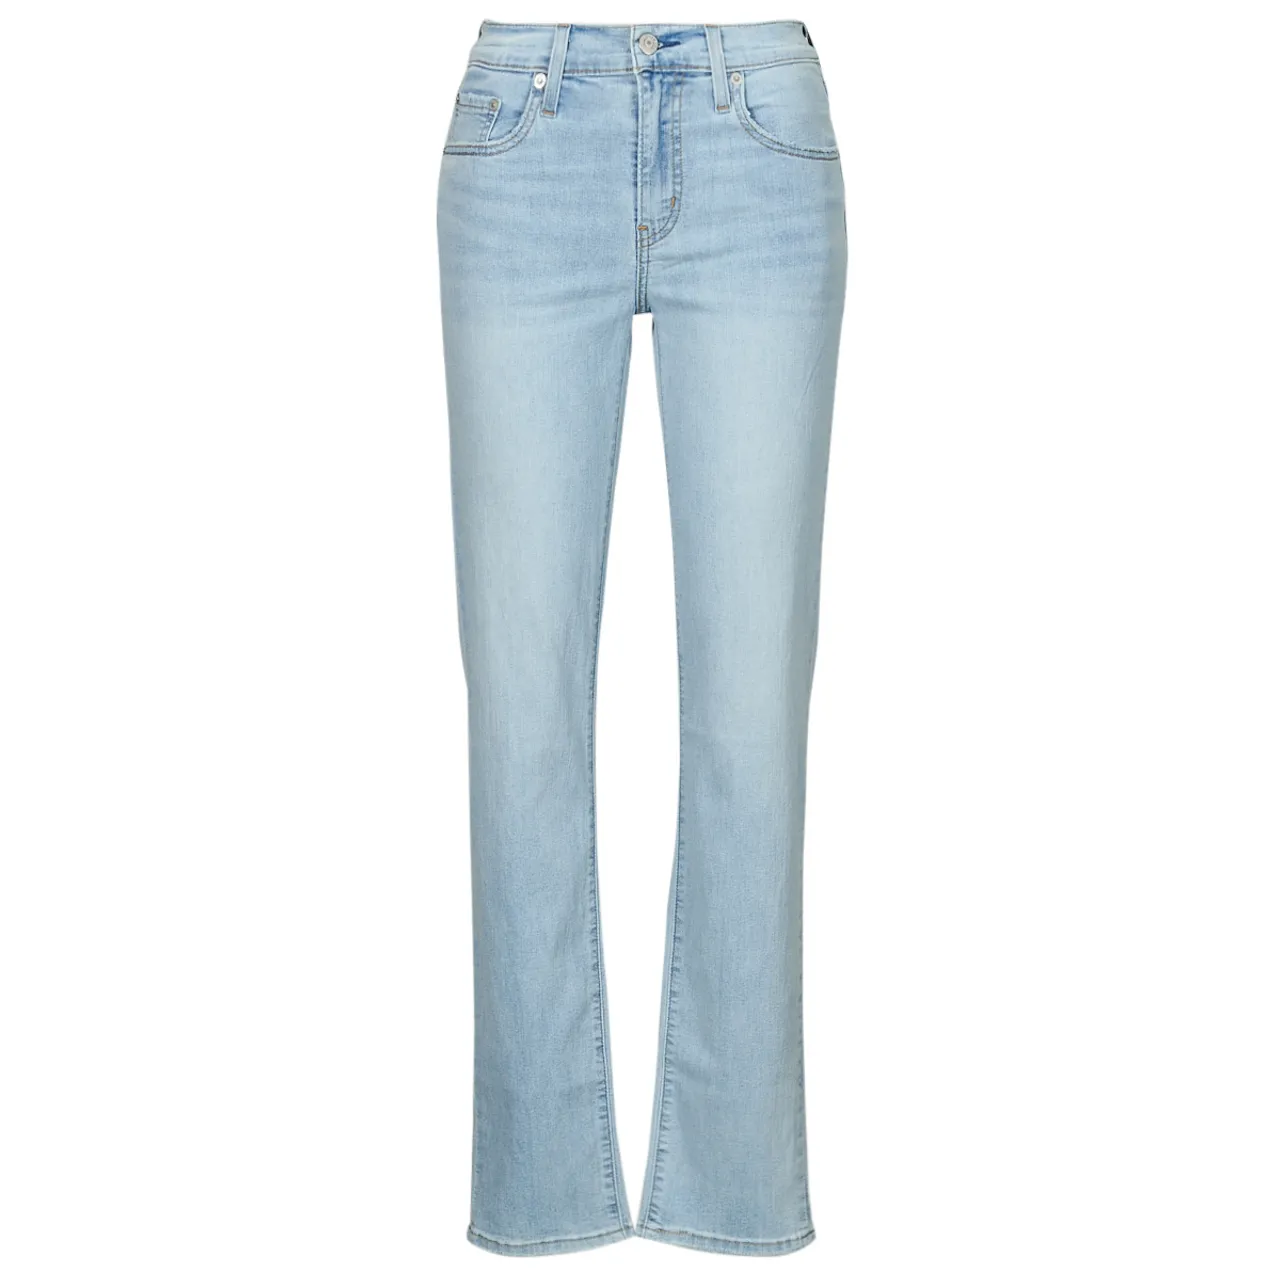 Levis  724 HIGH RISE STRAIGHT Lightweight  women's Jeans in Blue